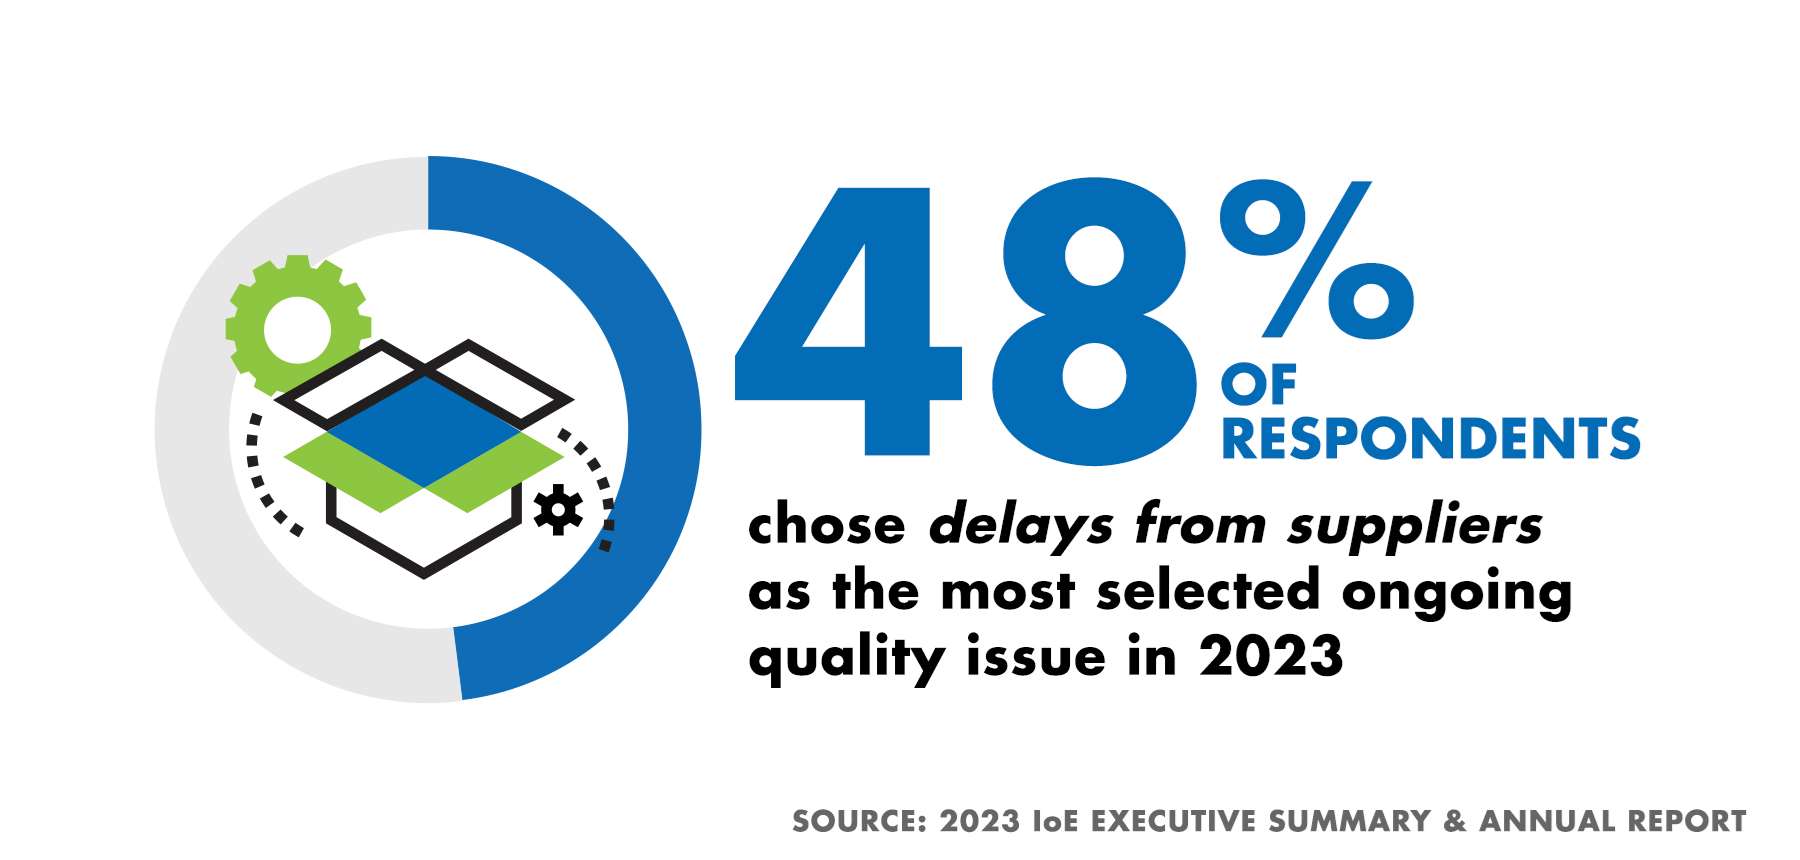 Graphic with text that reads "51% of respondents chose 'delays from suppliers' as the most selected ongoing quality issue in 2022"